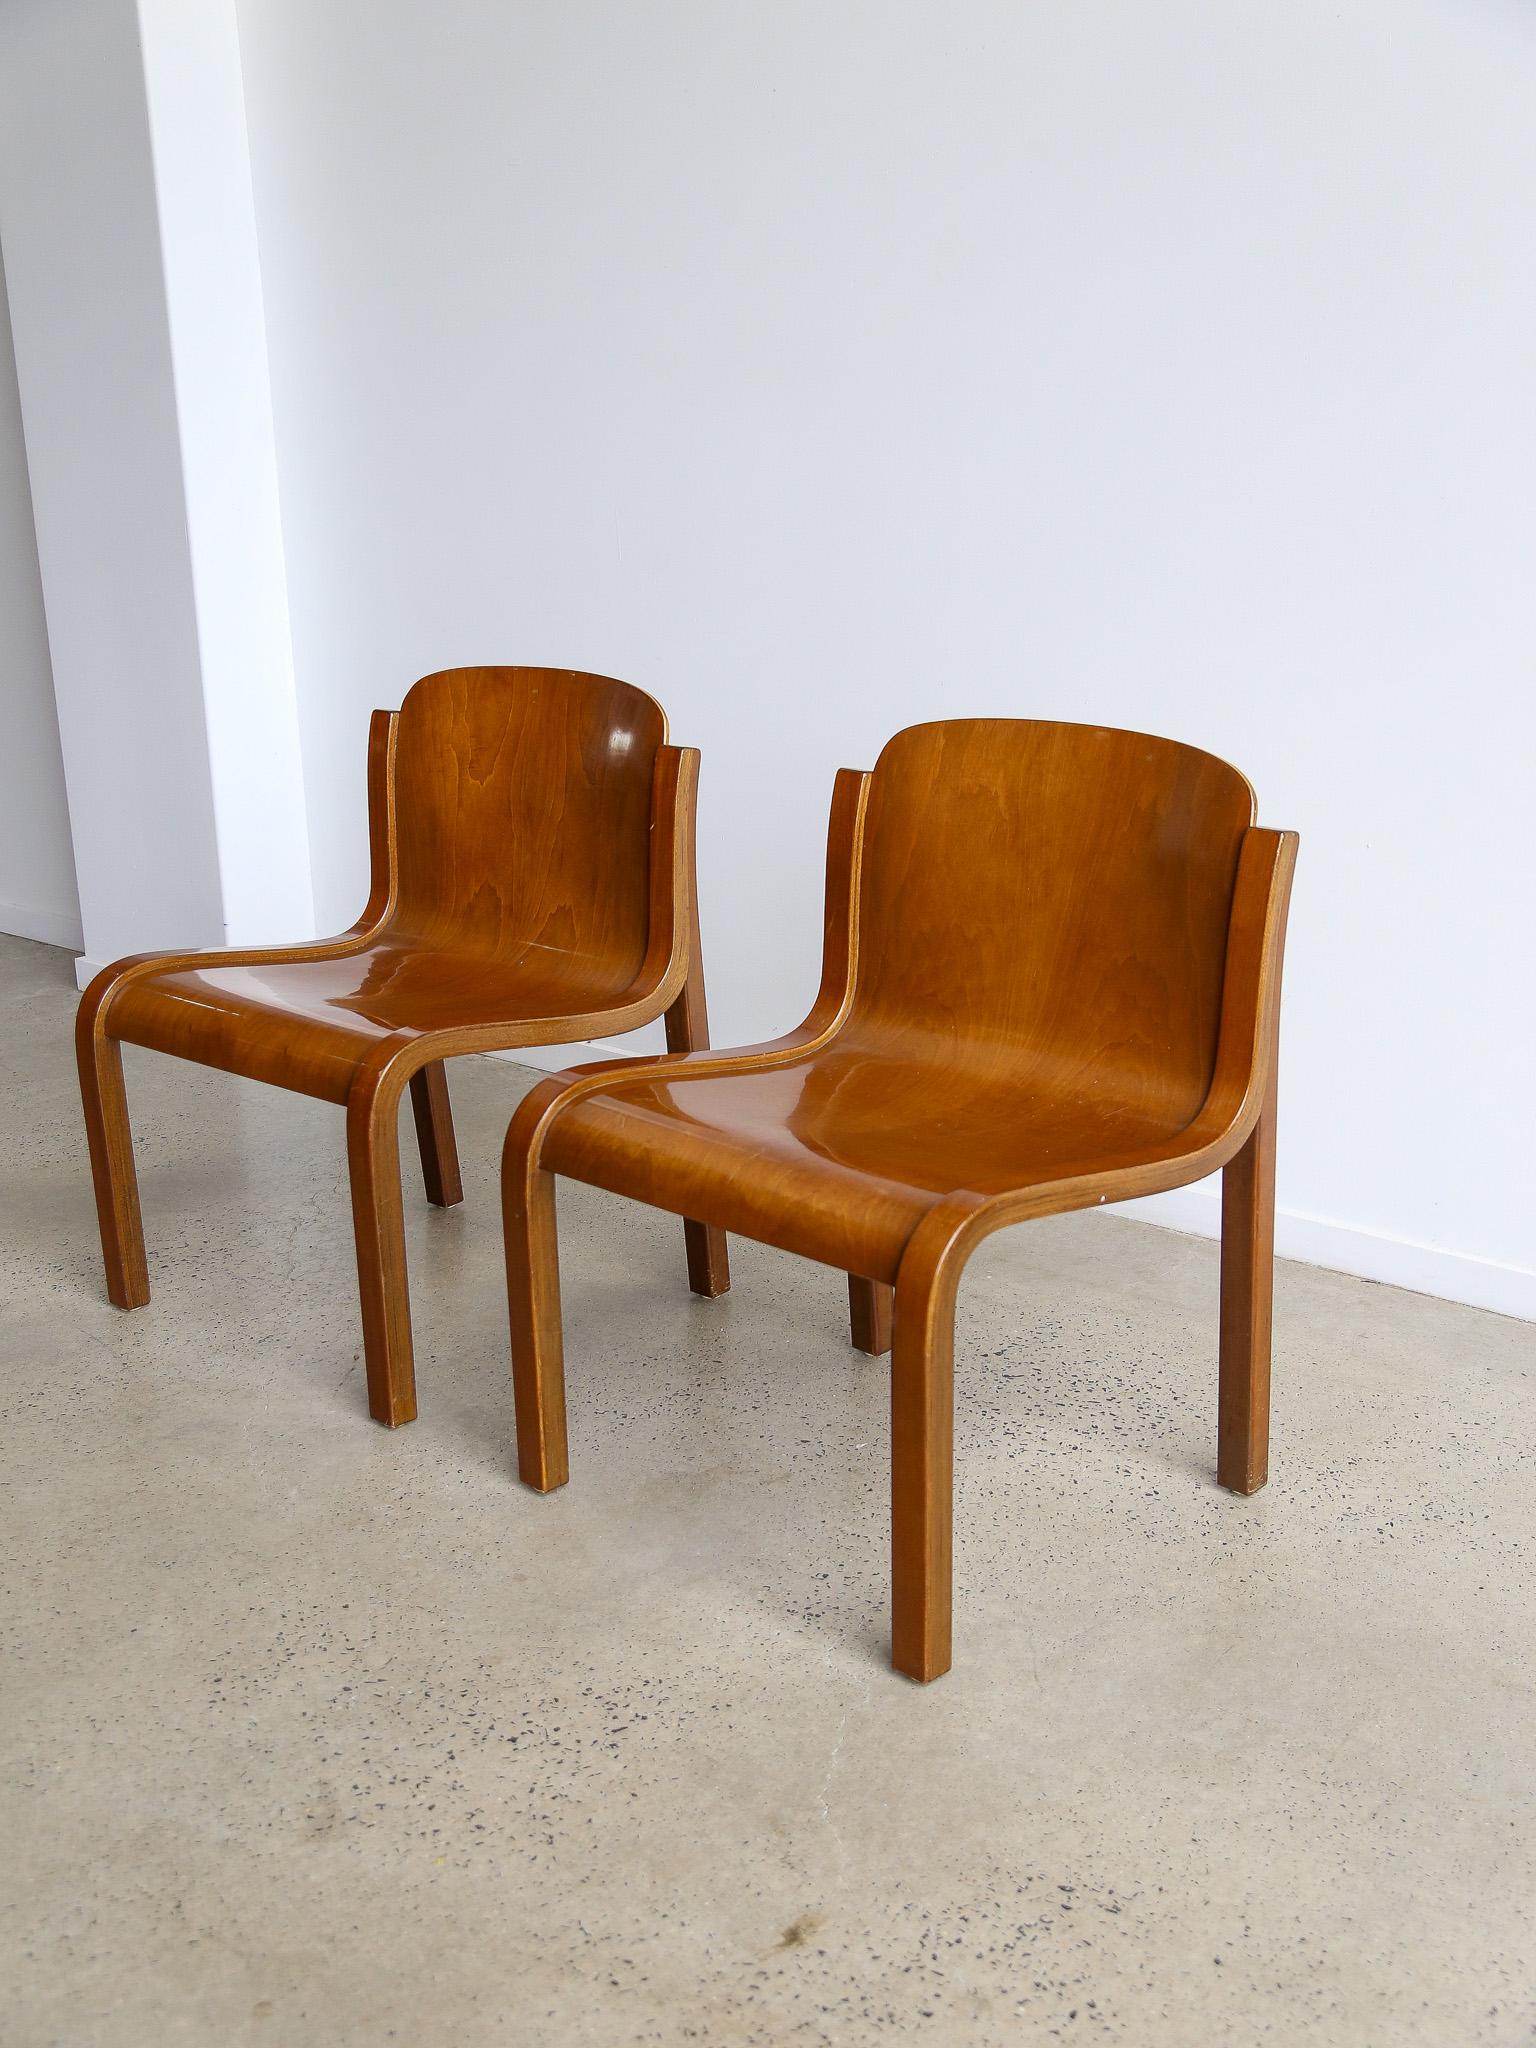 Mid-20th Century Mito Chairs by Carlo Bartoli for Tisettanta Set of Four For Sale